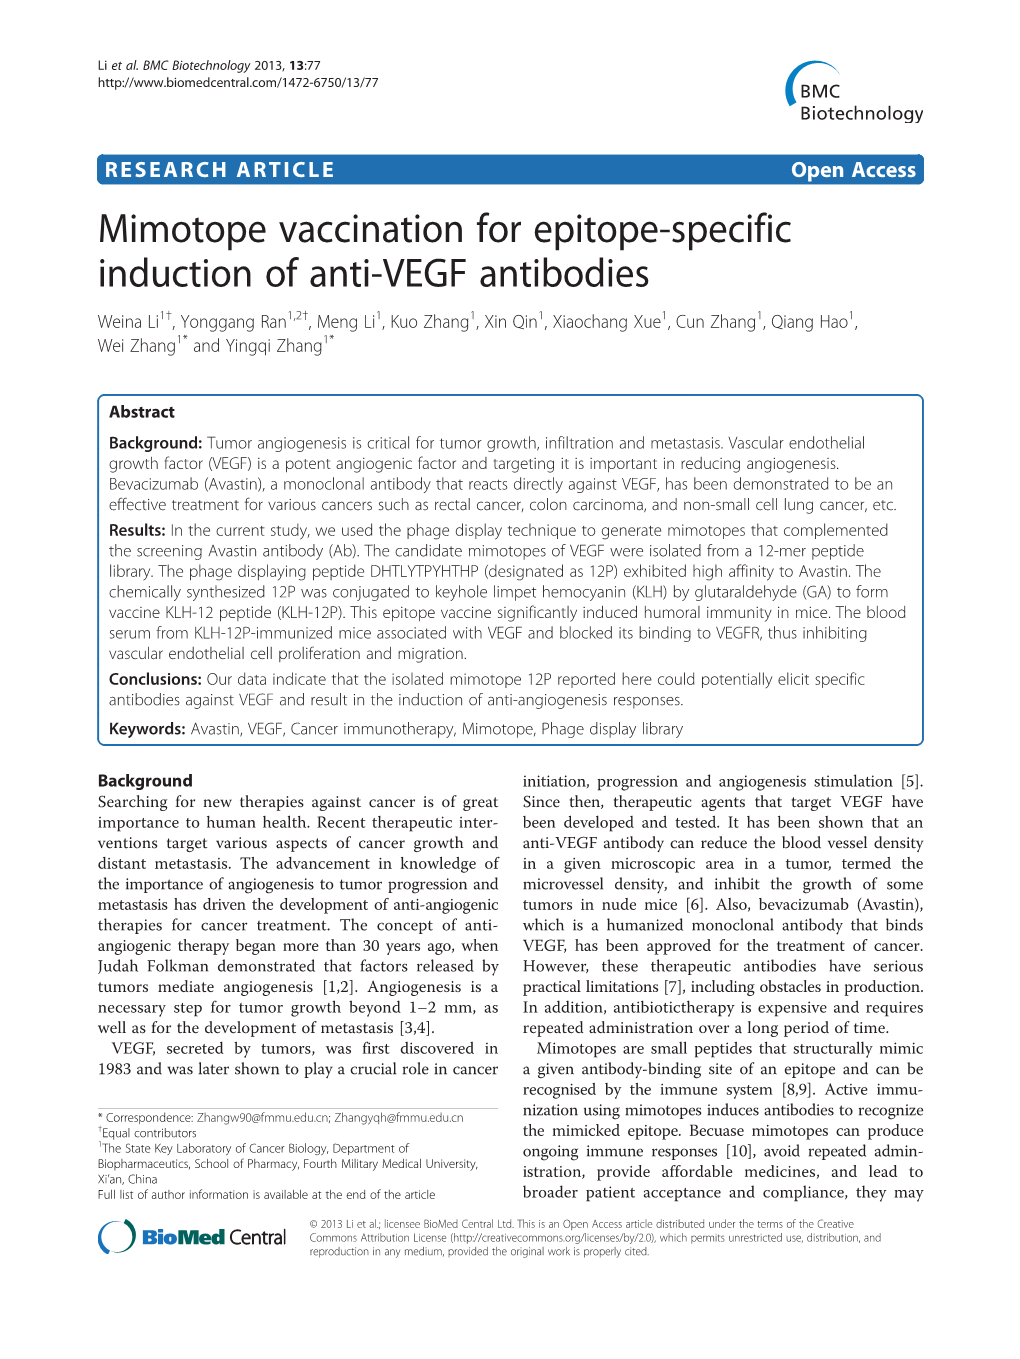 Mimotope Vaccination for Epitope-Specific Induction of Anti-VEGF Antibodies